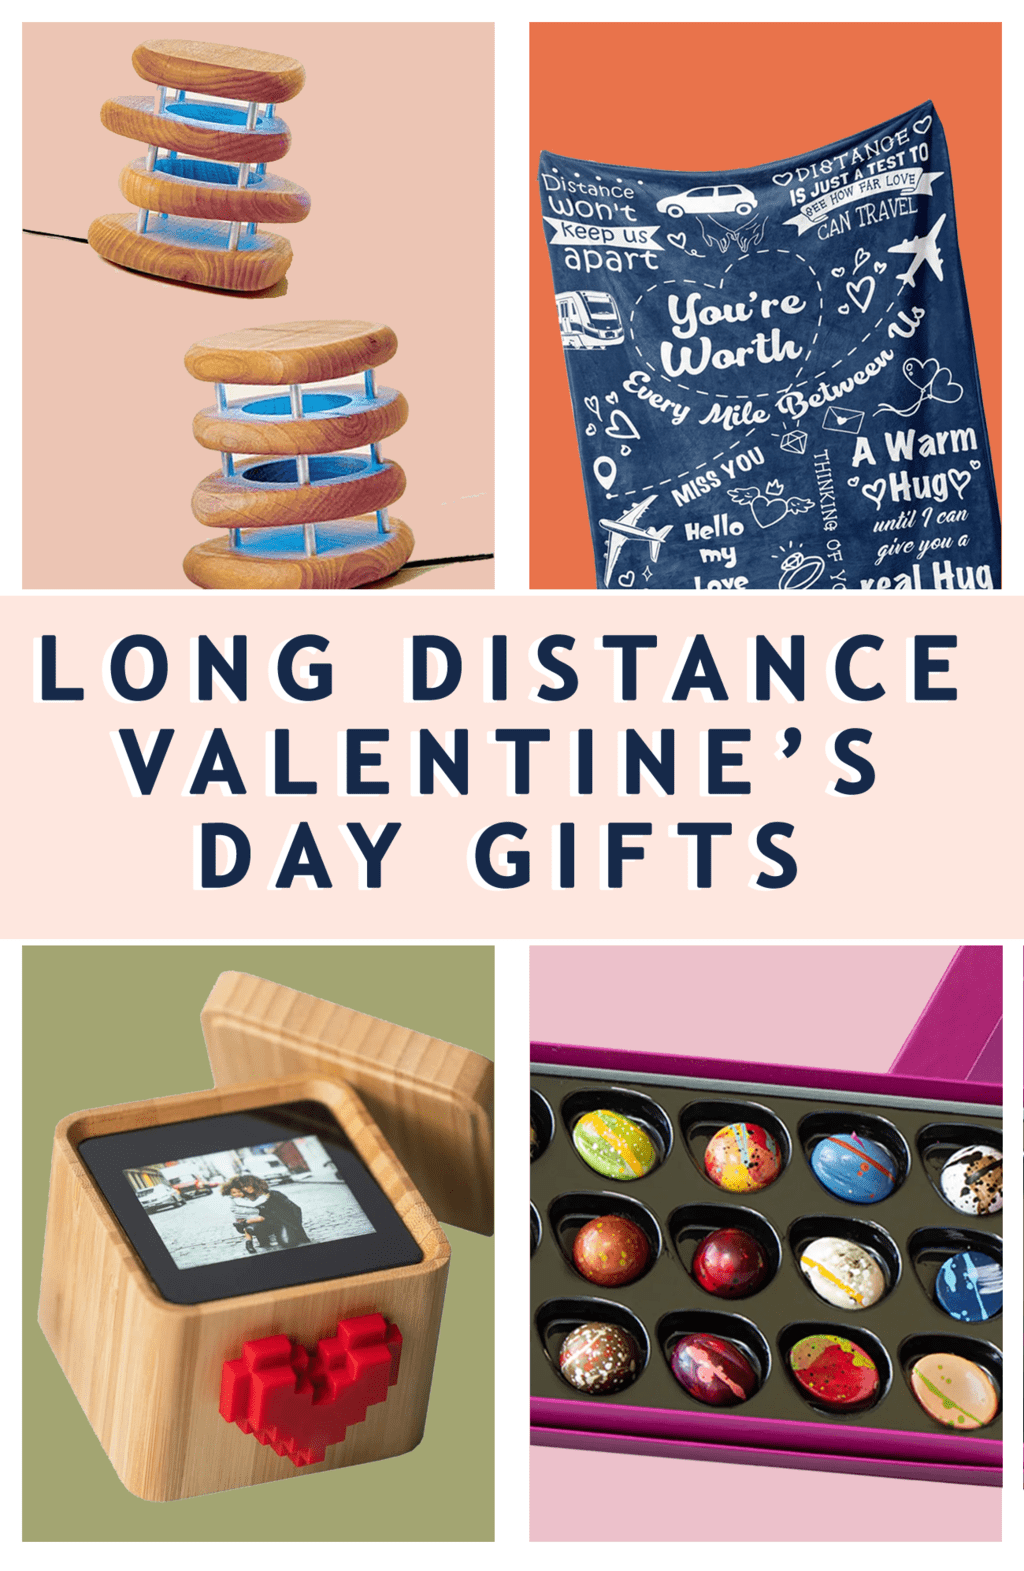 Long Distance Valentines Day Gifts Guide 